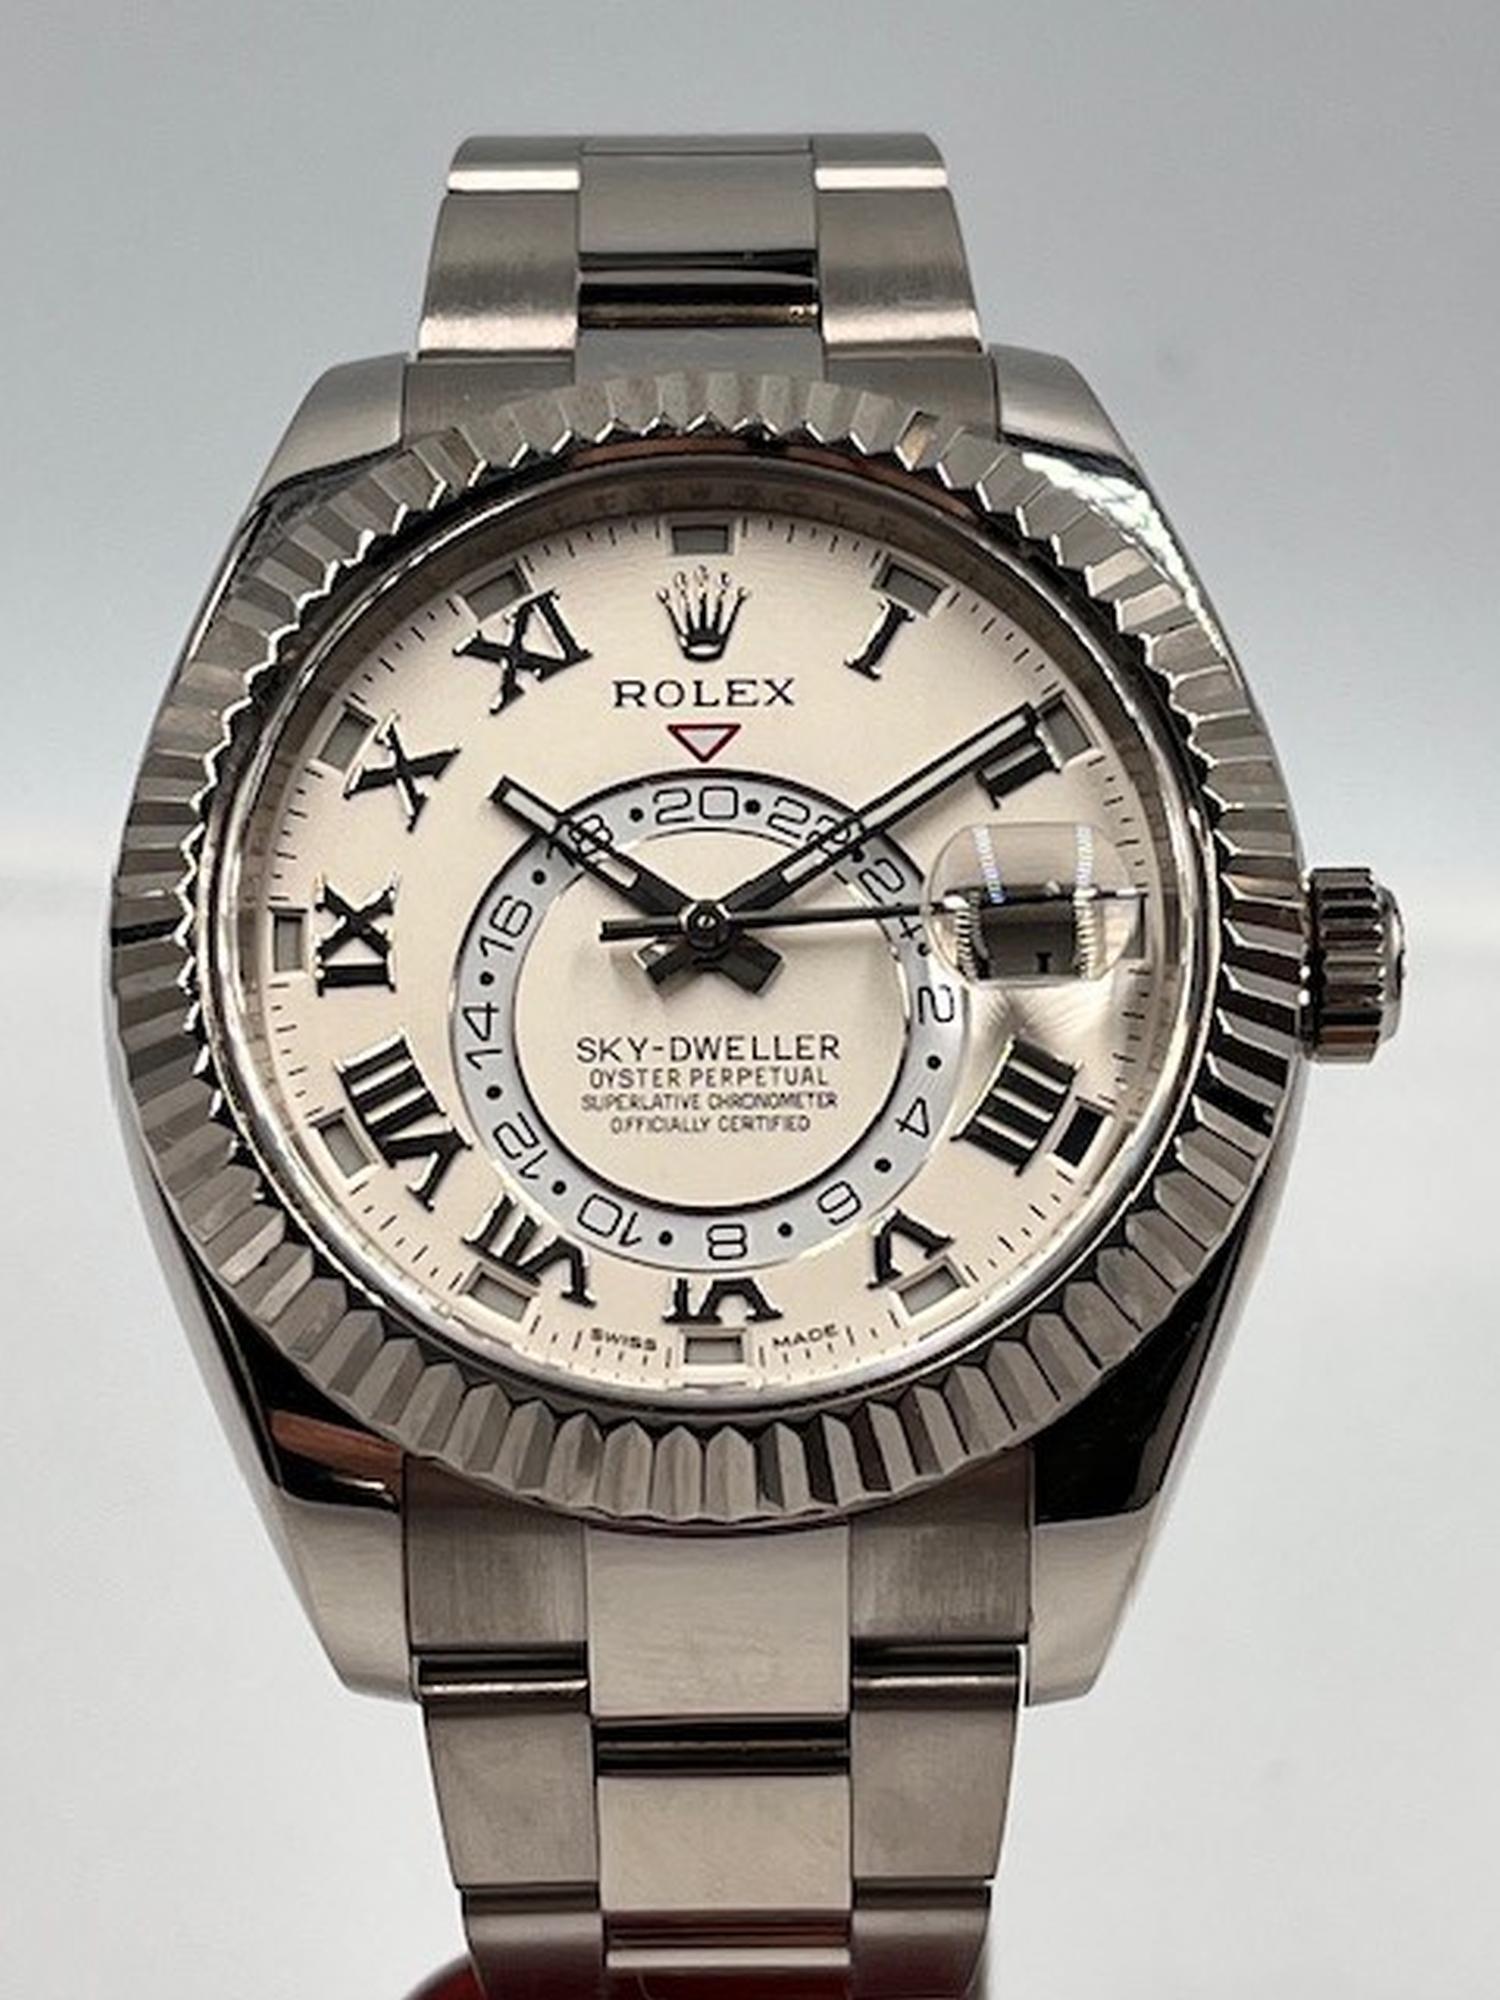 18CT WHITE GOLD ROLEX SKYDWELLER 326939 BOX AND PAPERS 2013 - Image 3 of 8